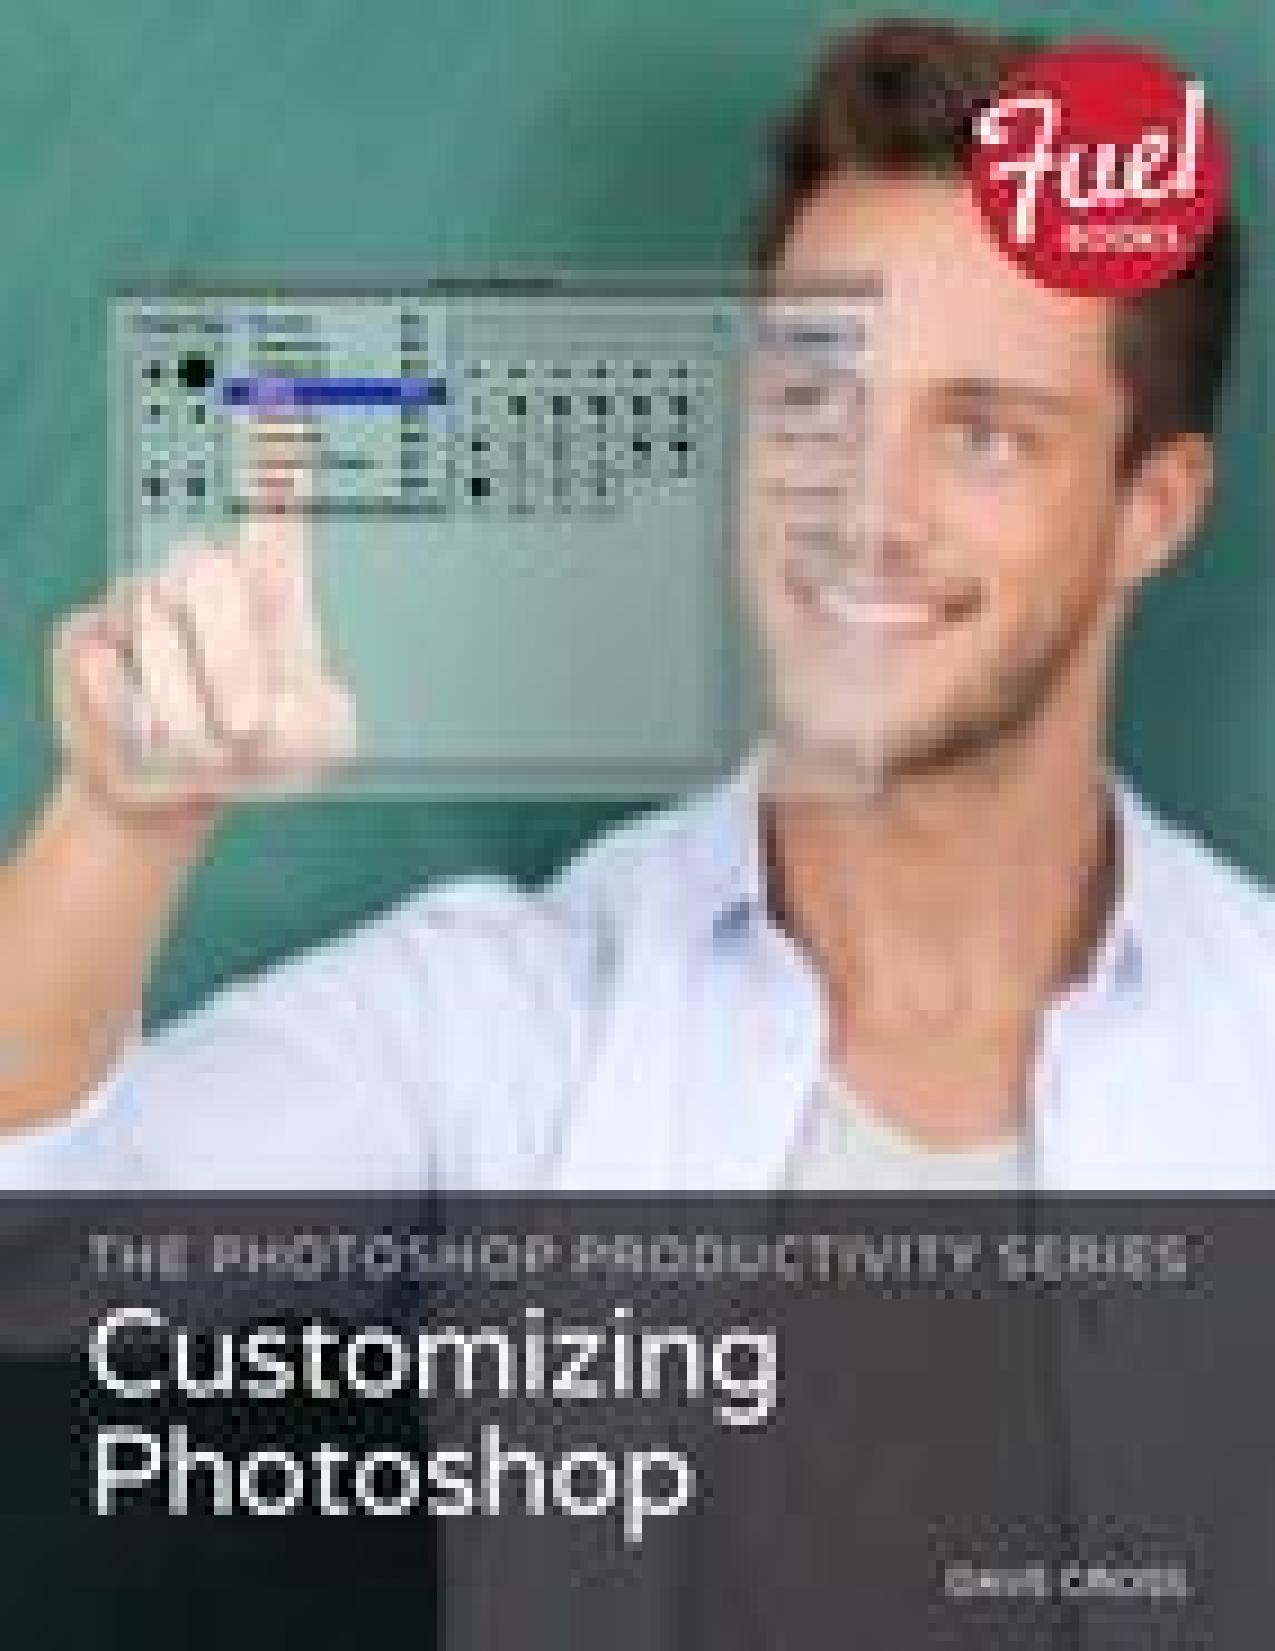 The Photoshop Productivity Series: Customizing Photoshop by Dave Cross